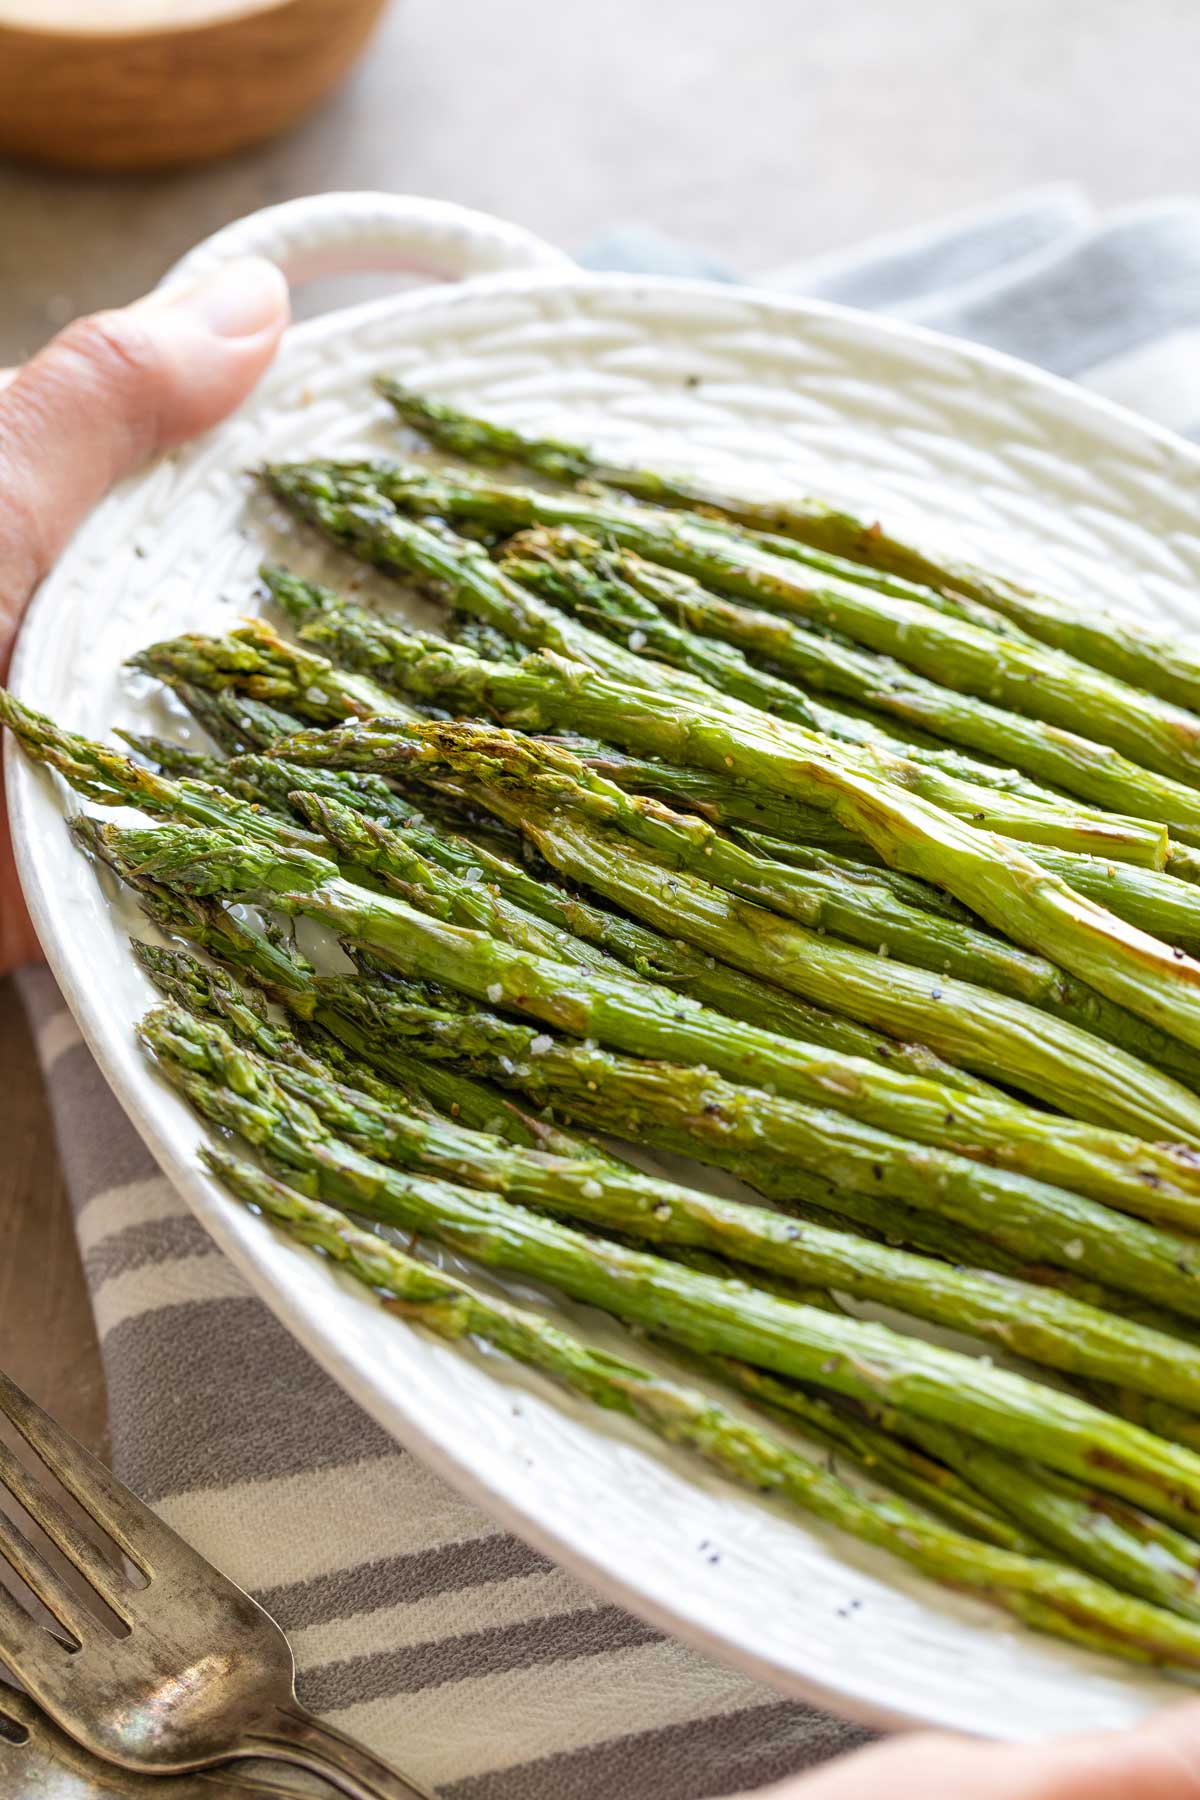 Hands holding serving platter of asparagus above gray-striped cloth.